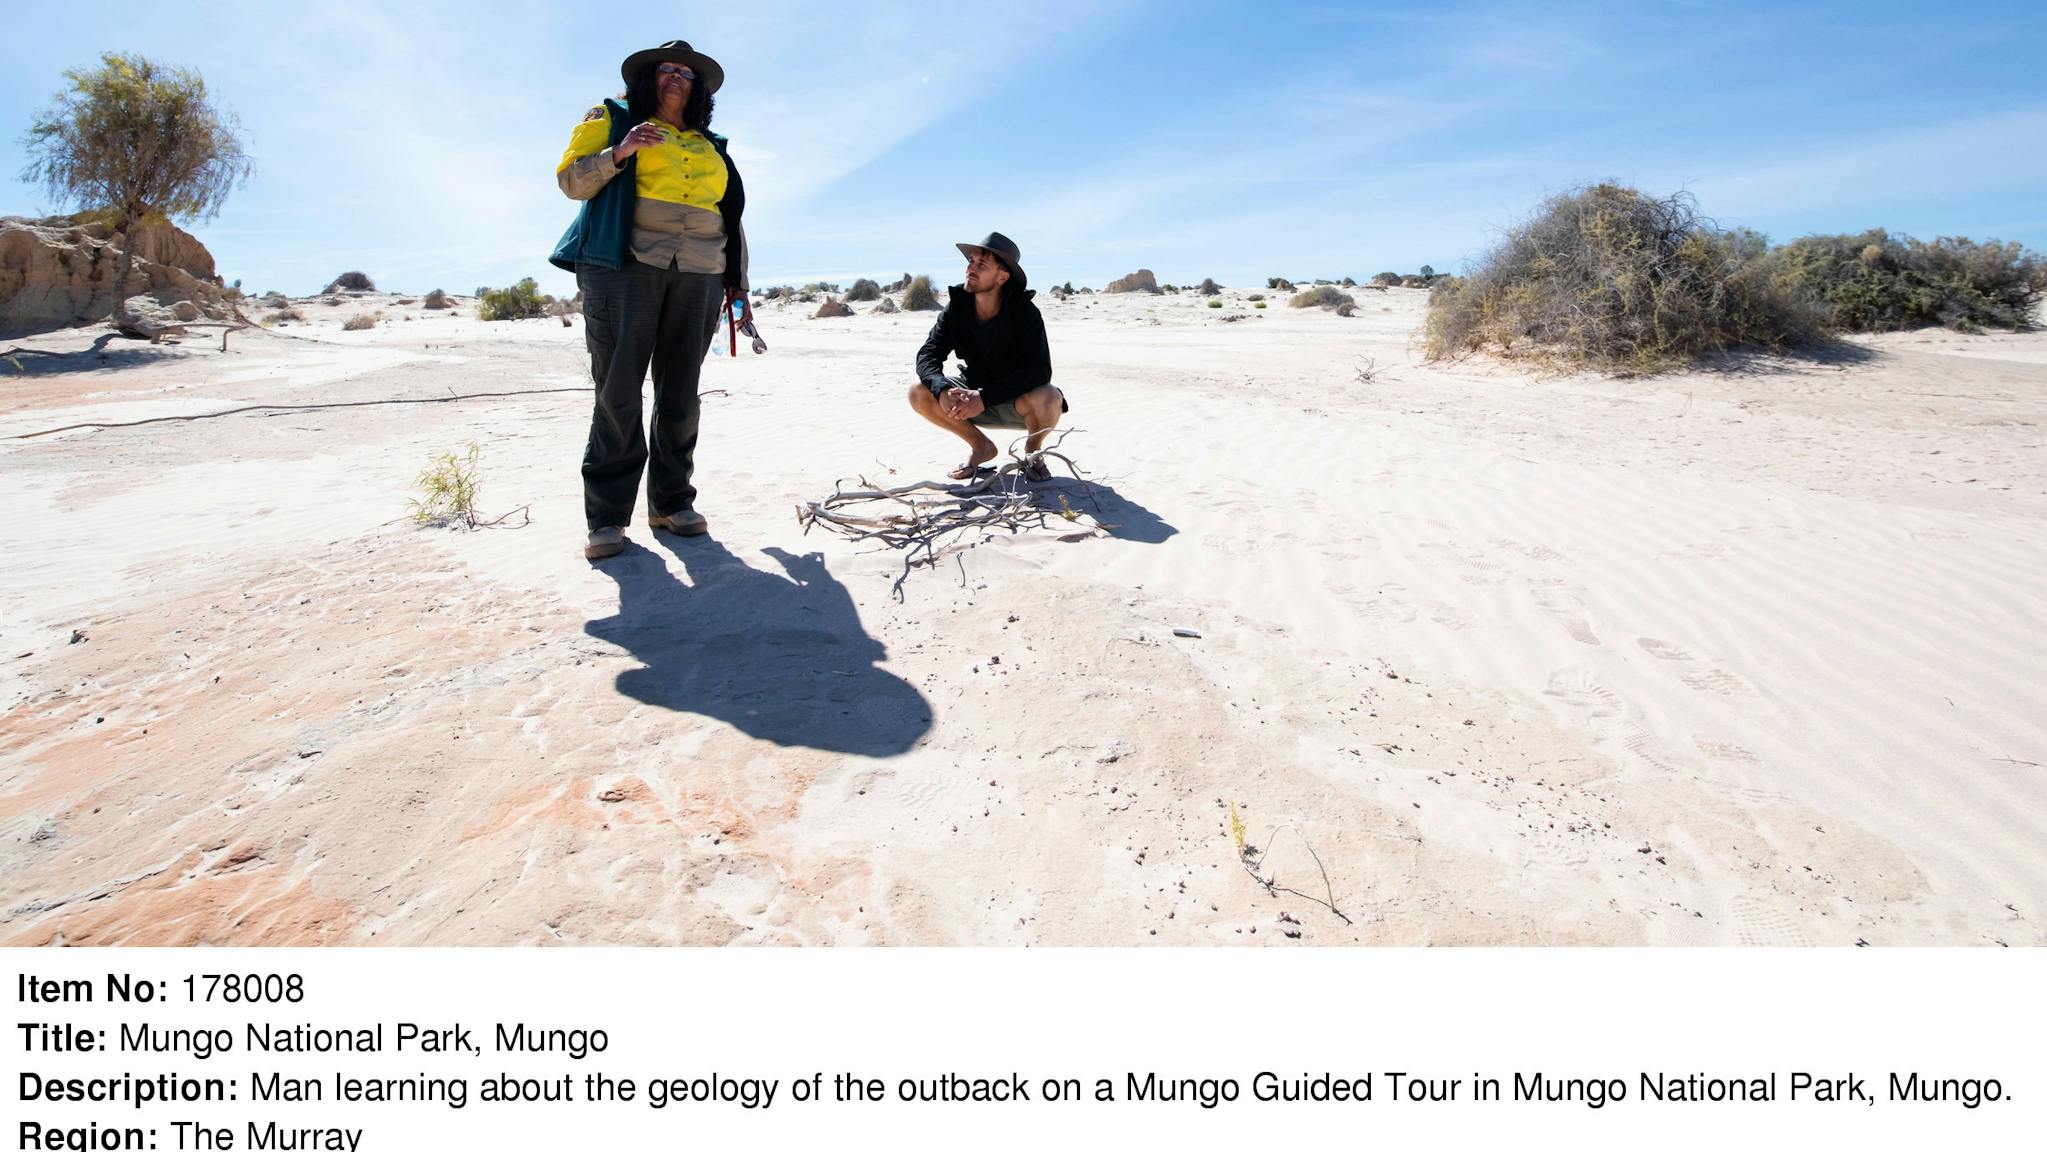 Man learning about the geology of the outback on a guided tour in Mungo National Park